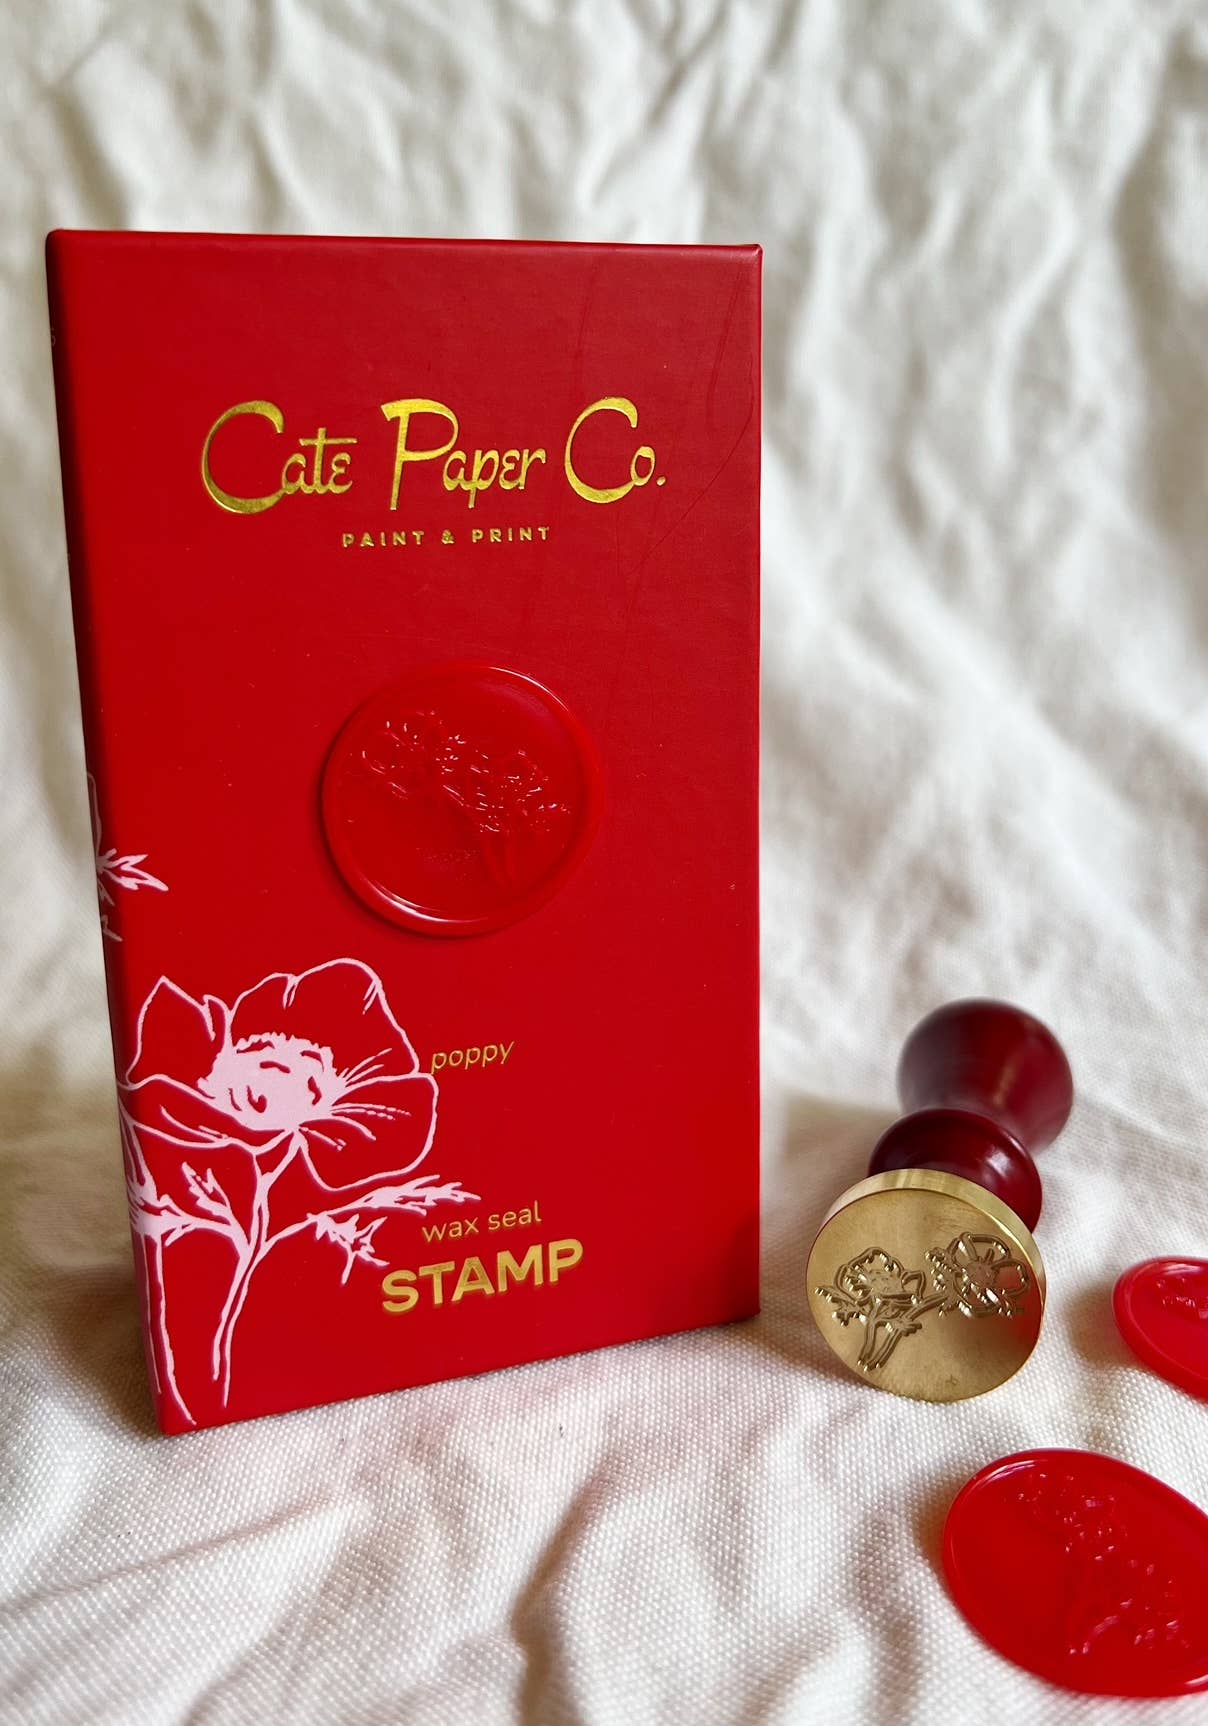 Cate Paper Co. - Wax seal stamp and wax stick set-Poppy